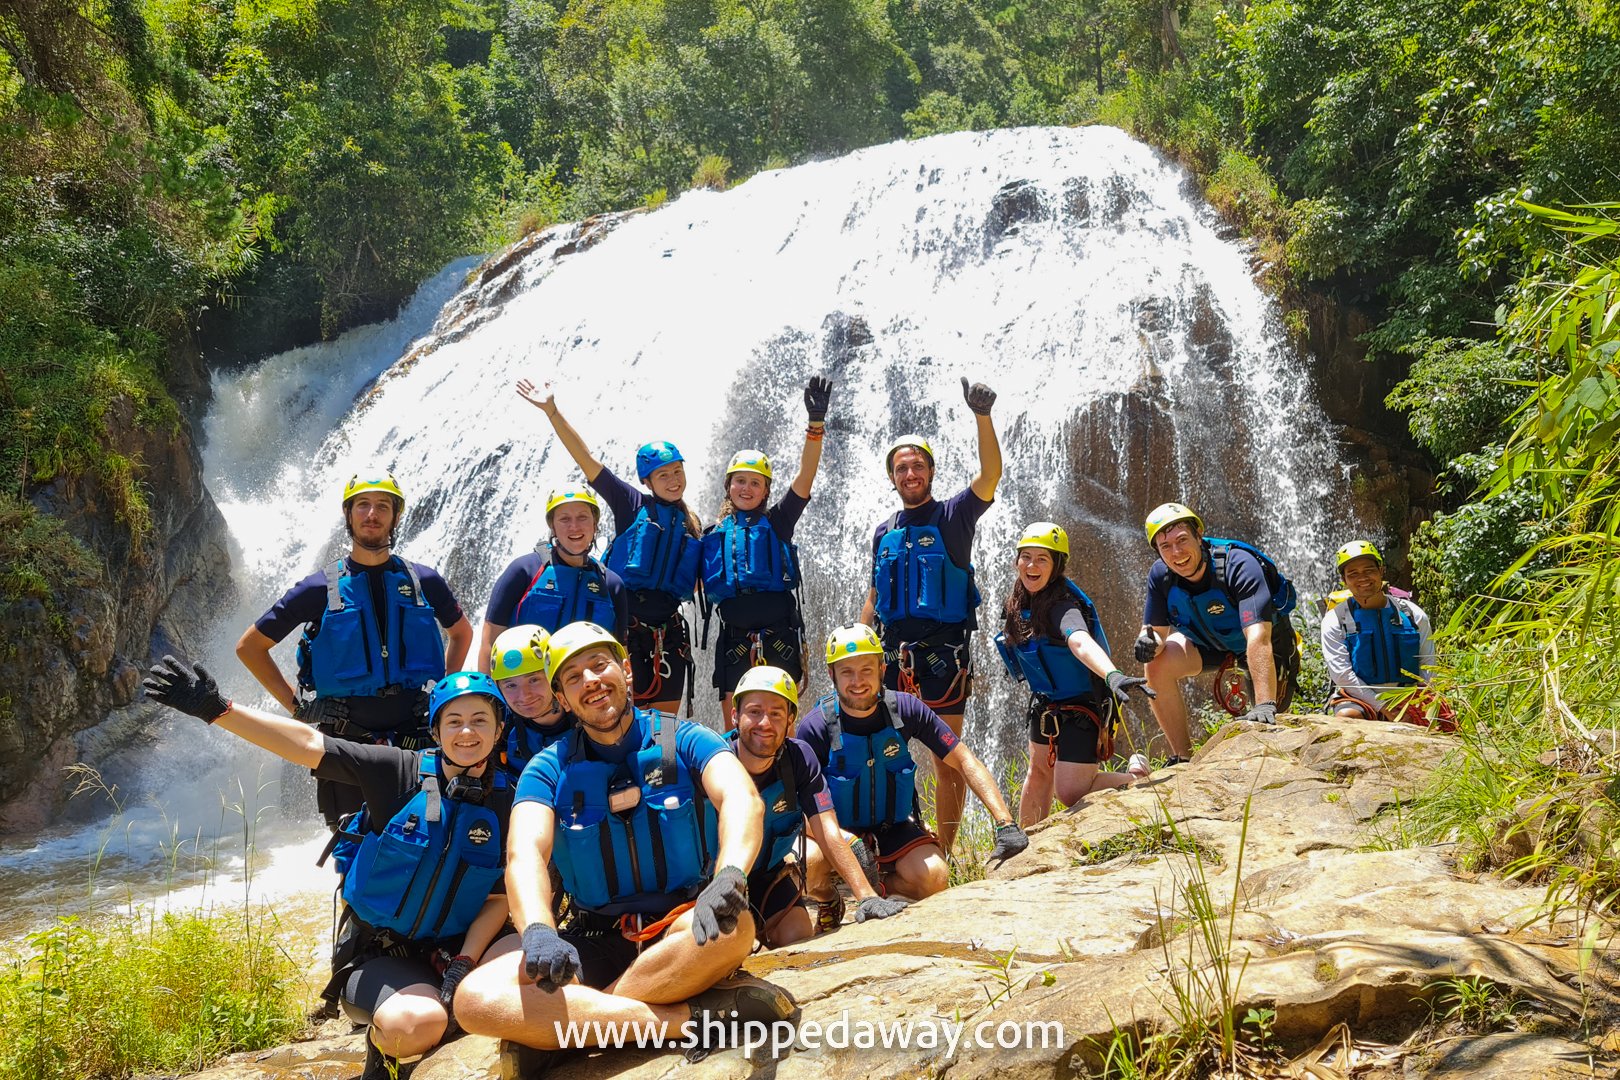 Group photo by the big waterfall while canyoning in Da Lat, Vietnam